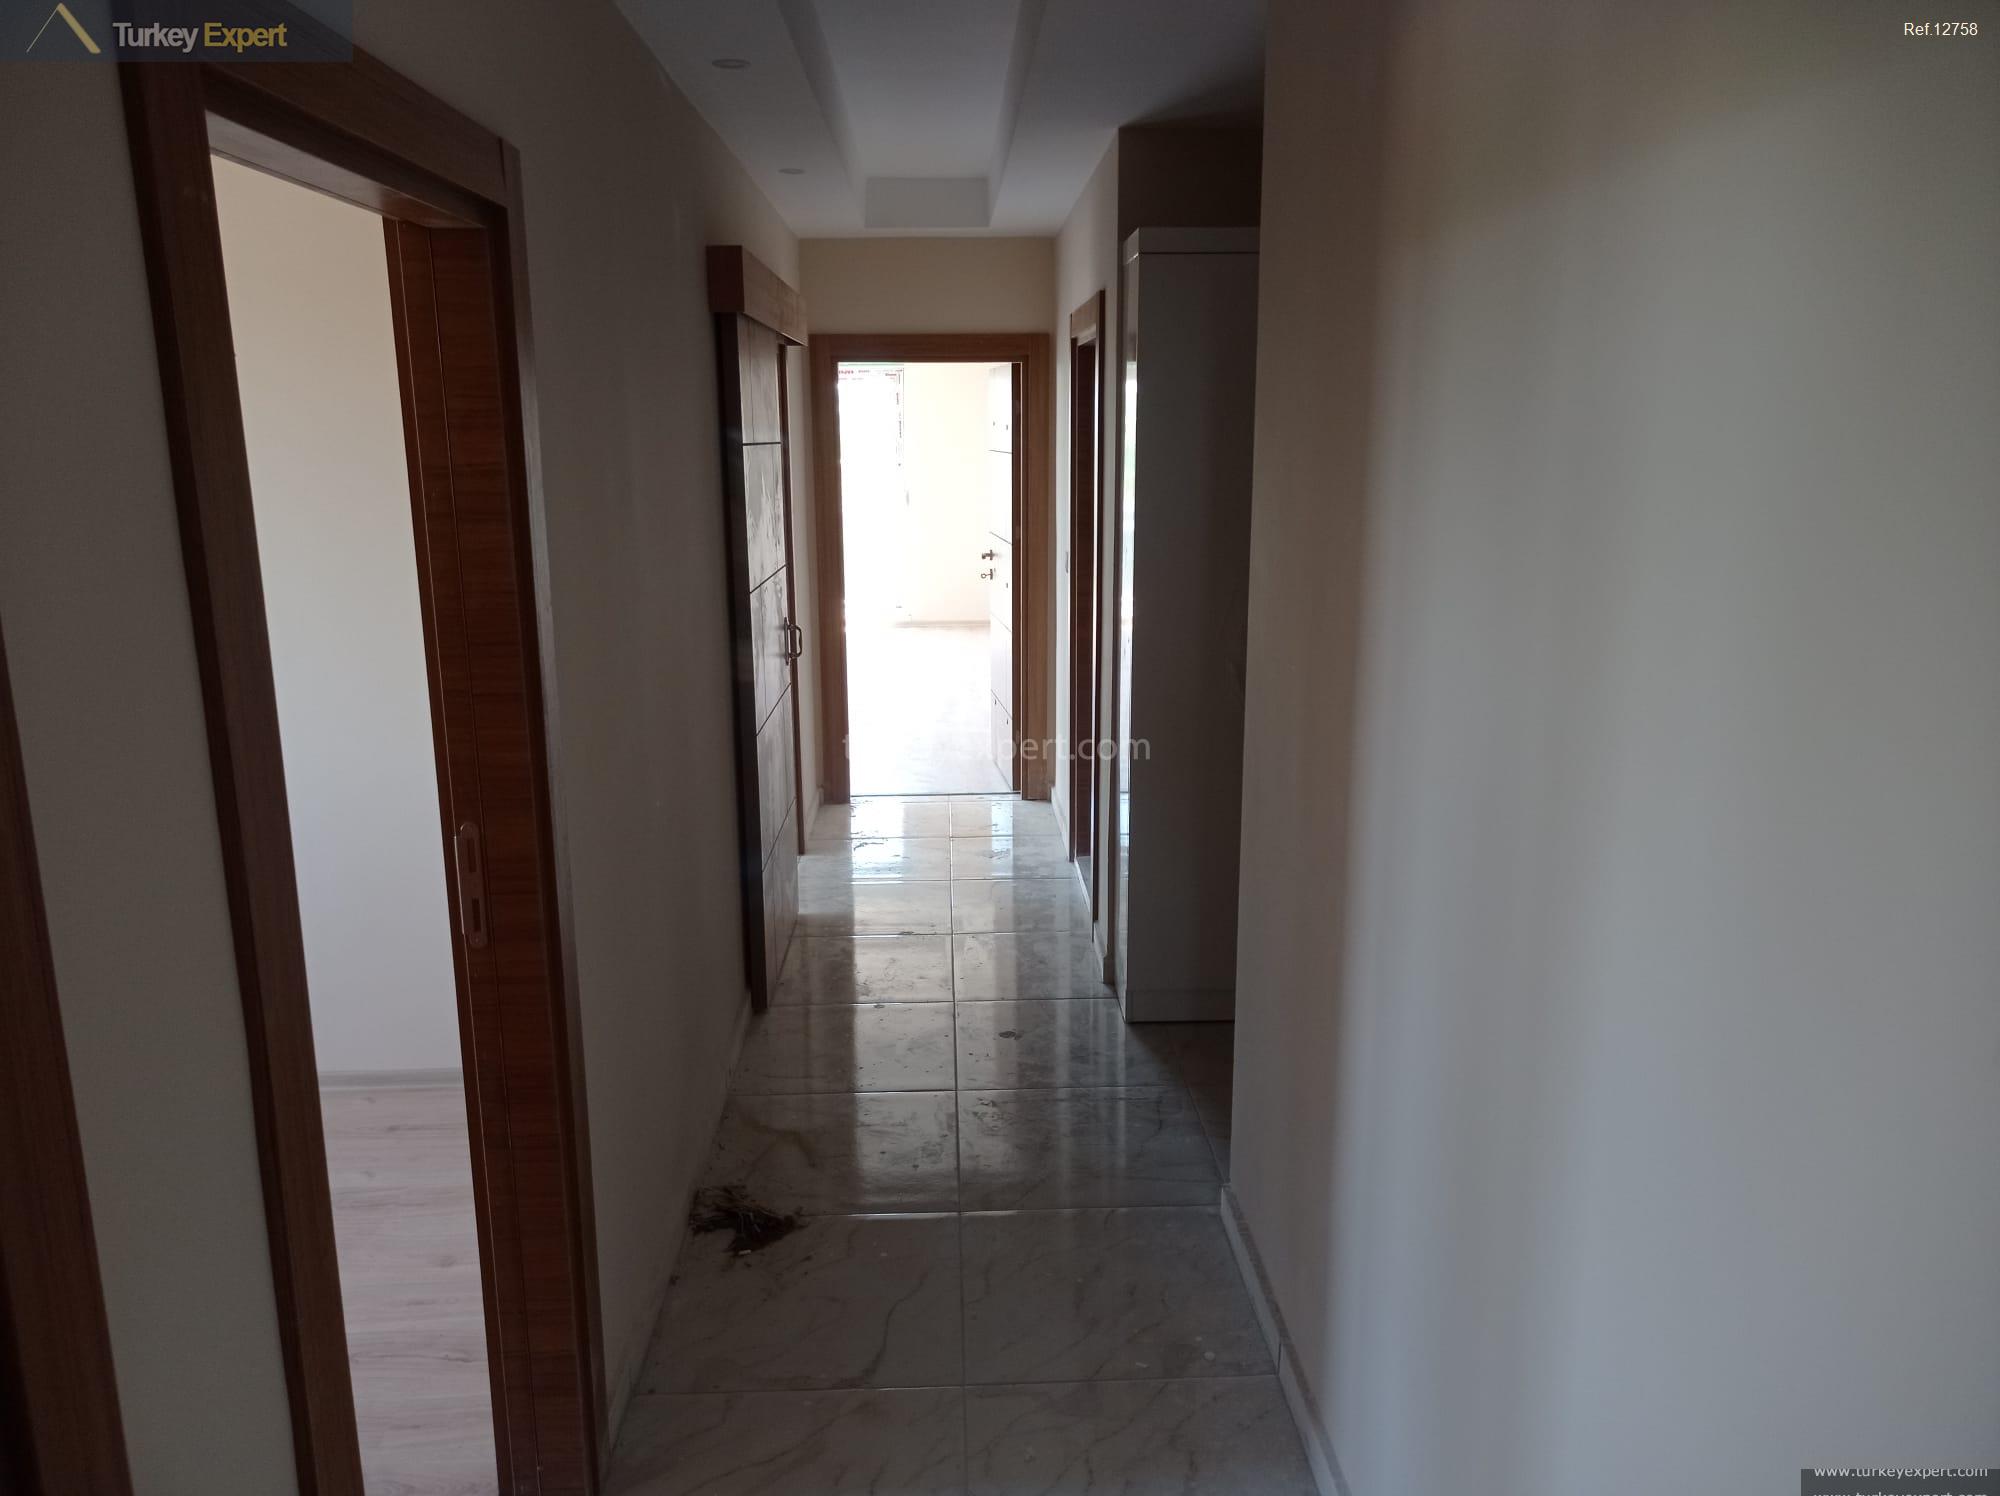 110new apartments for sale in istanbul muratpasa close to the